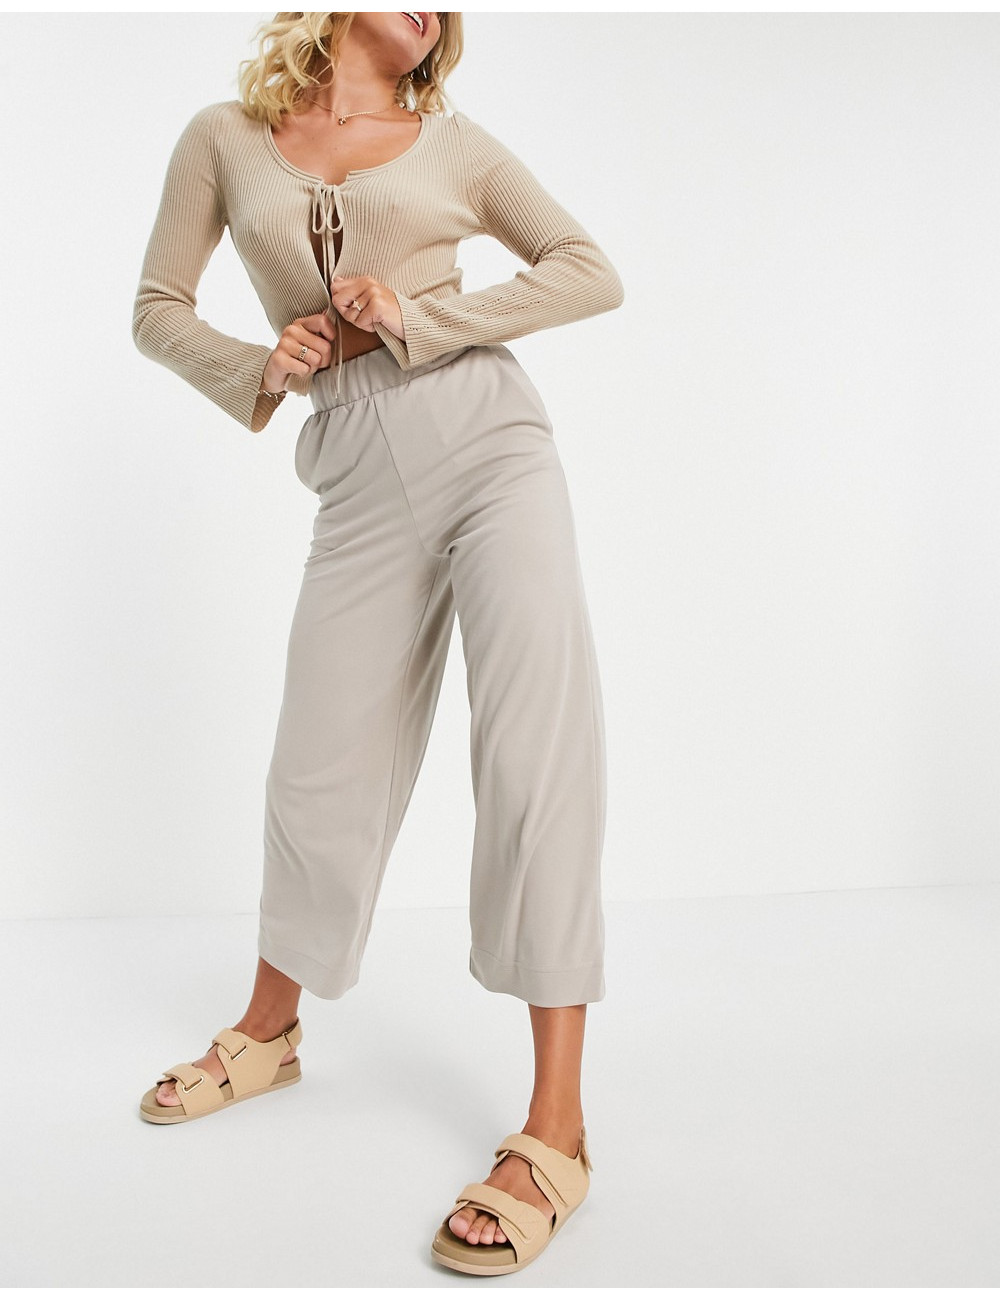 Monki Cilla recycled co-ord...